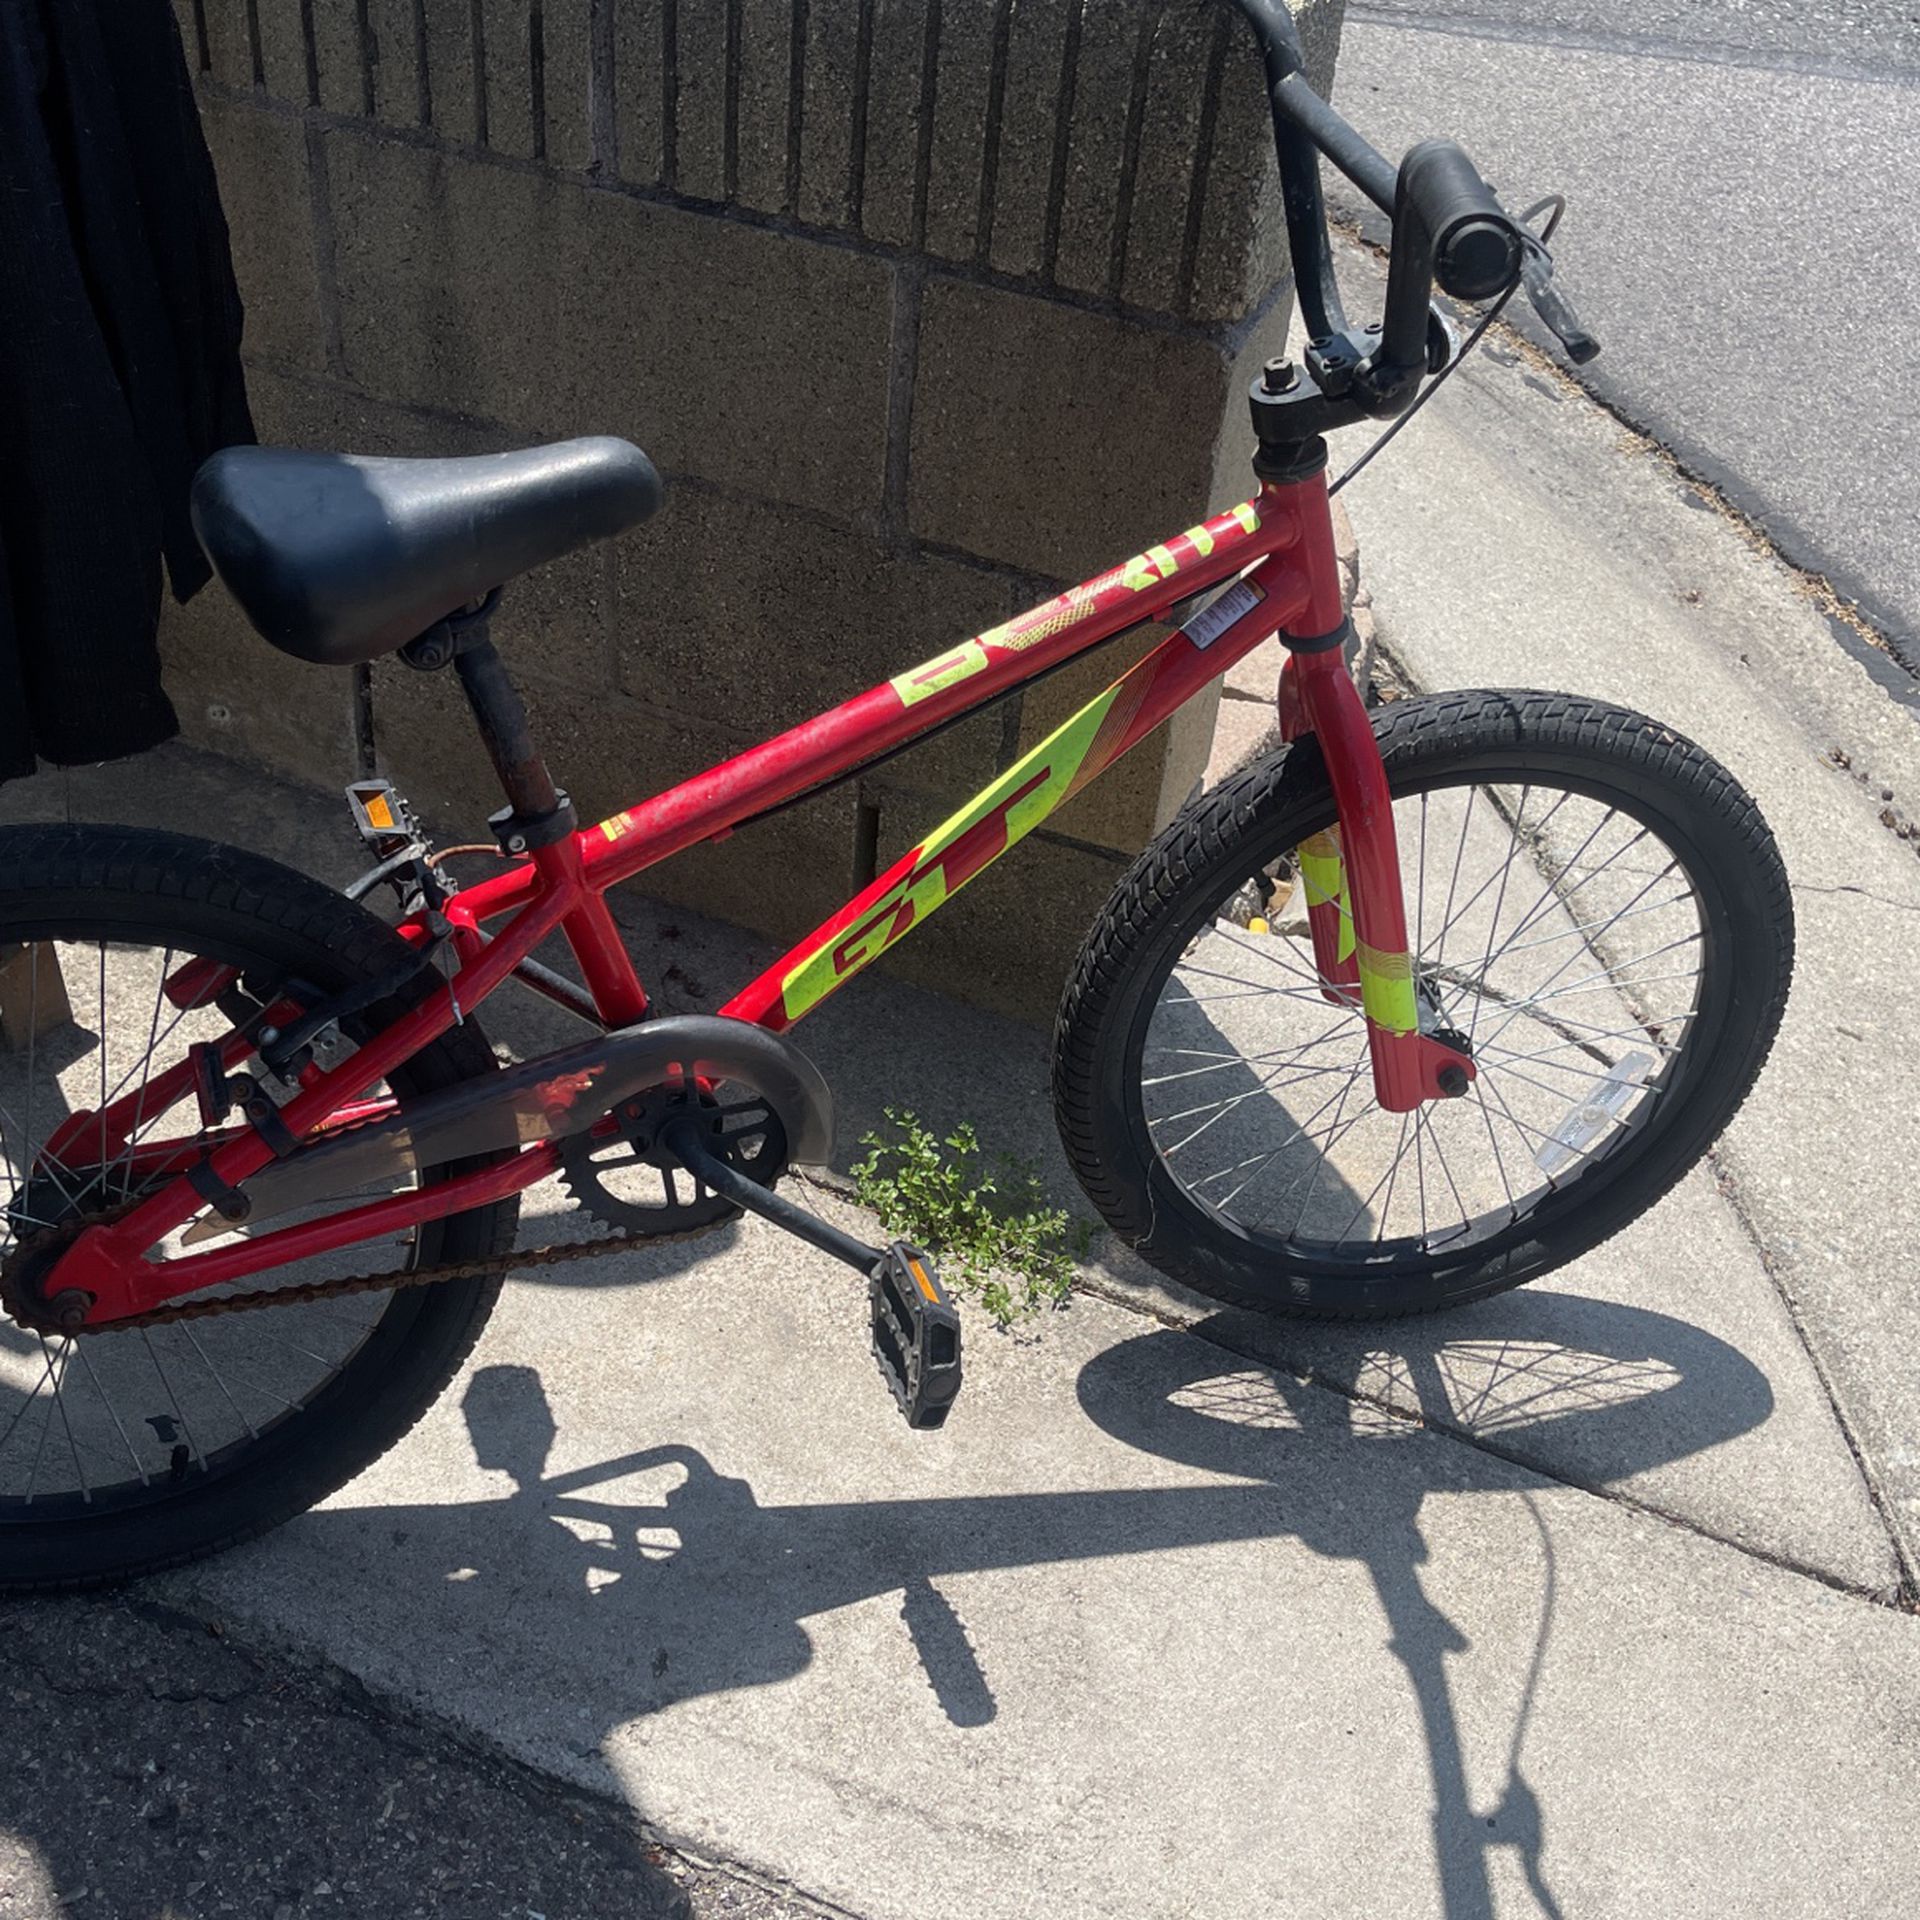 $55 BIKE  For Sale Raising Money For Cooperstown trip